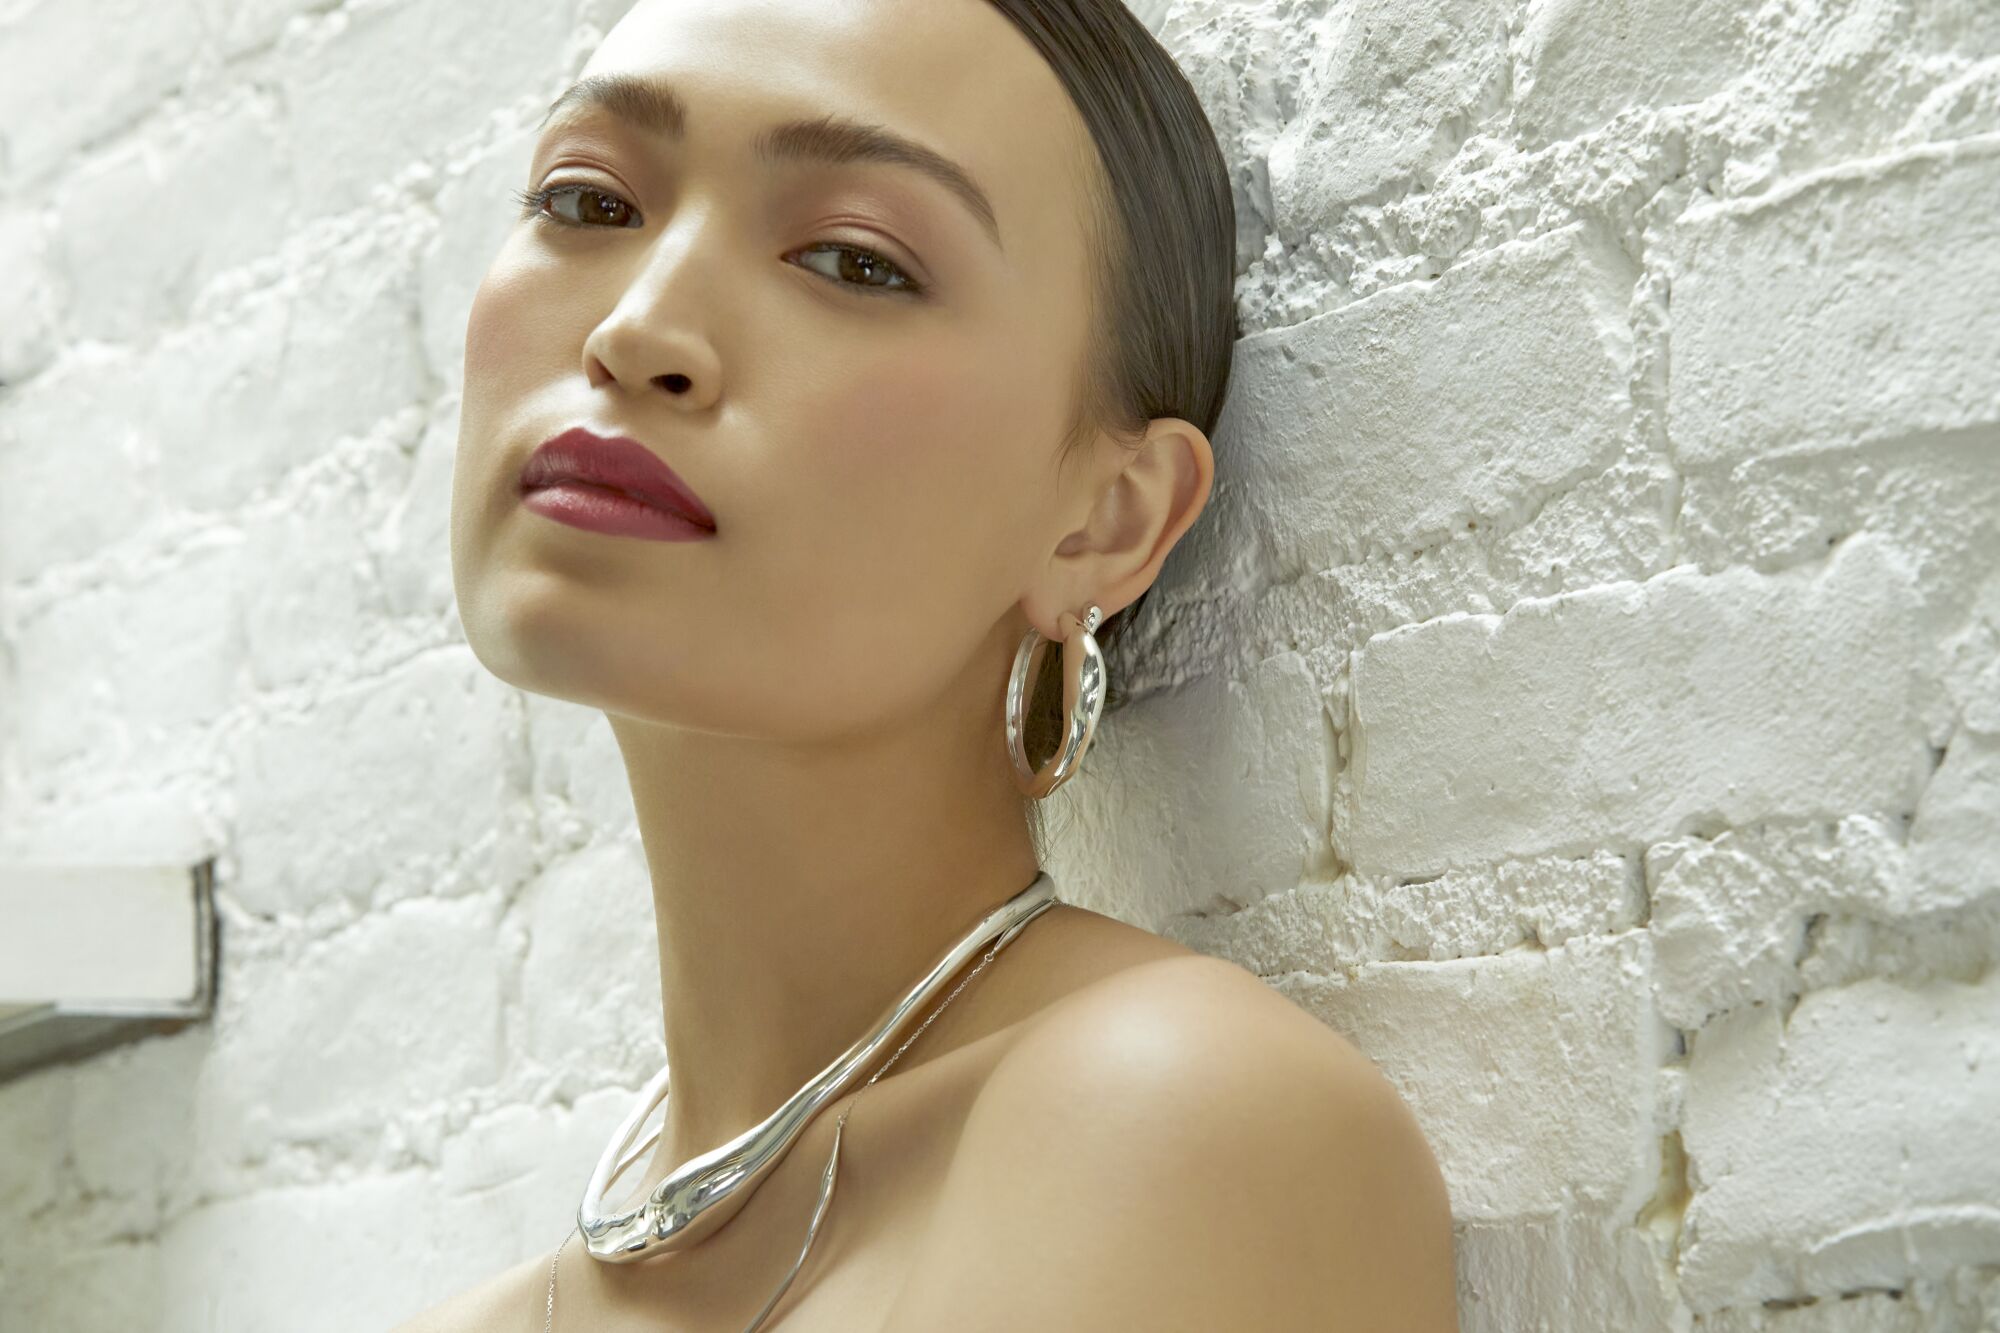 A woman wearing silver jewelry leans her head against a white brick wall.